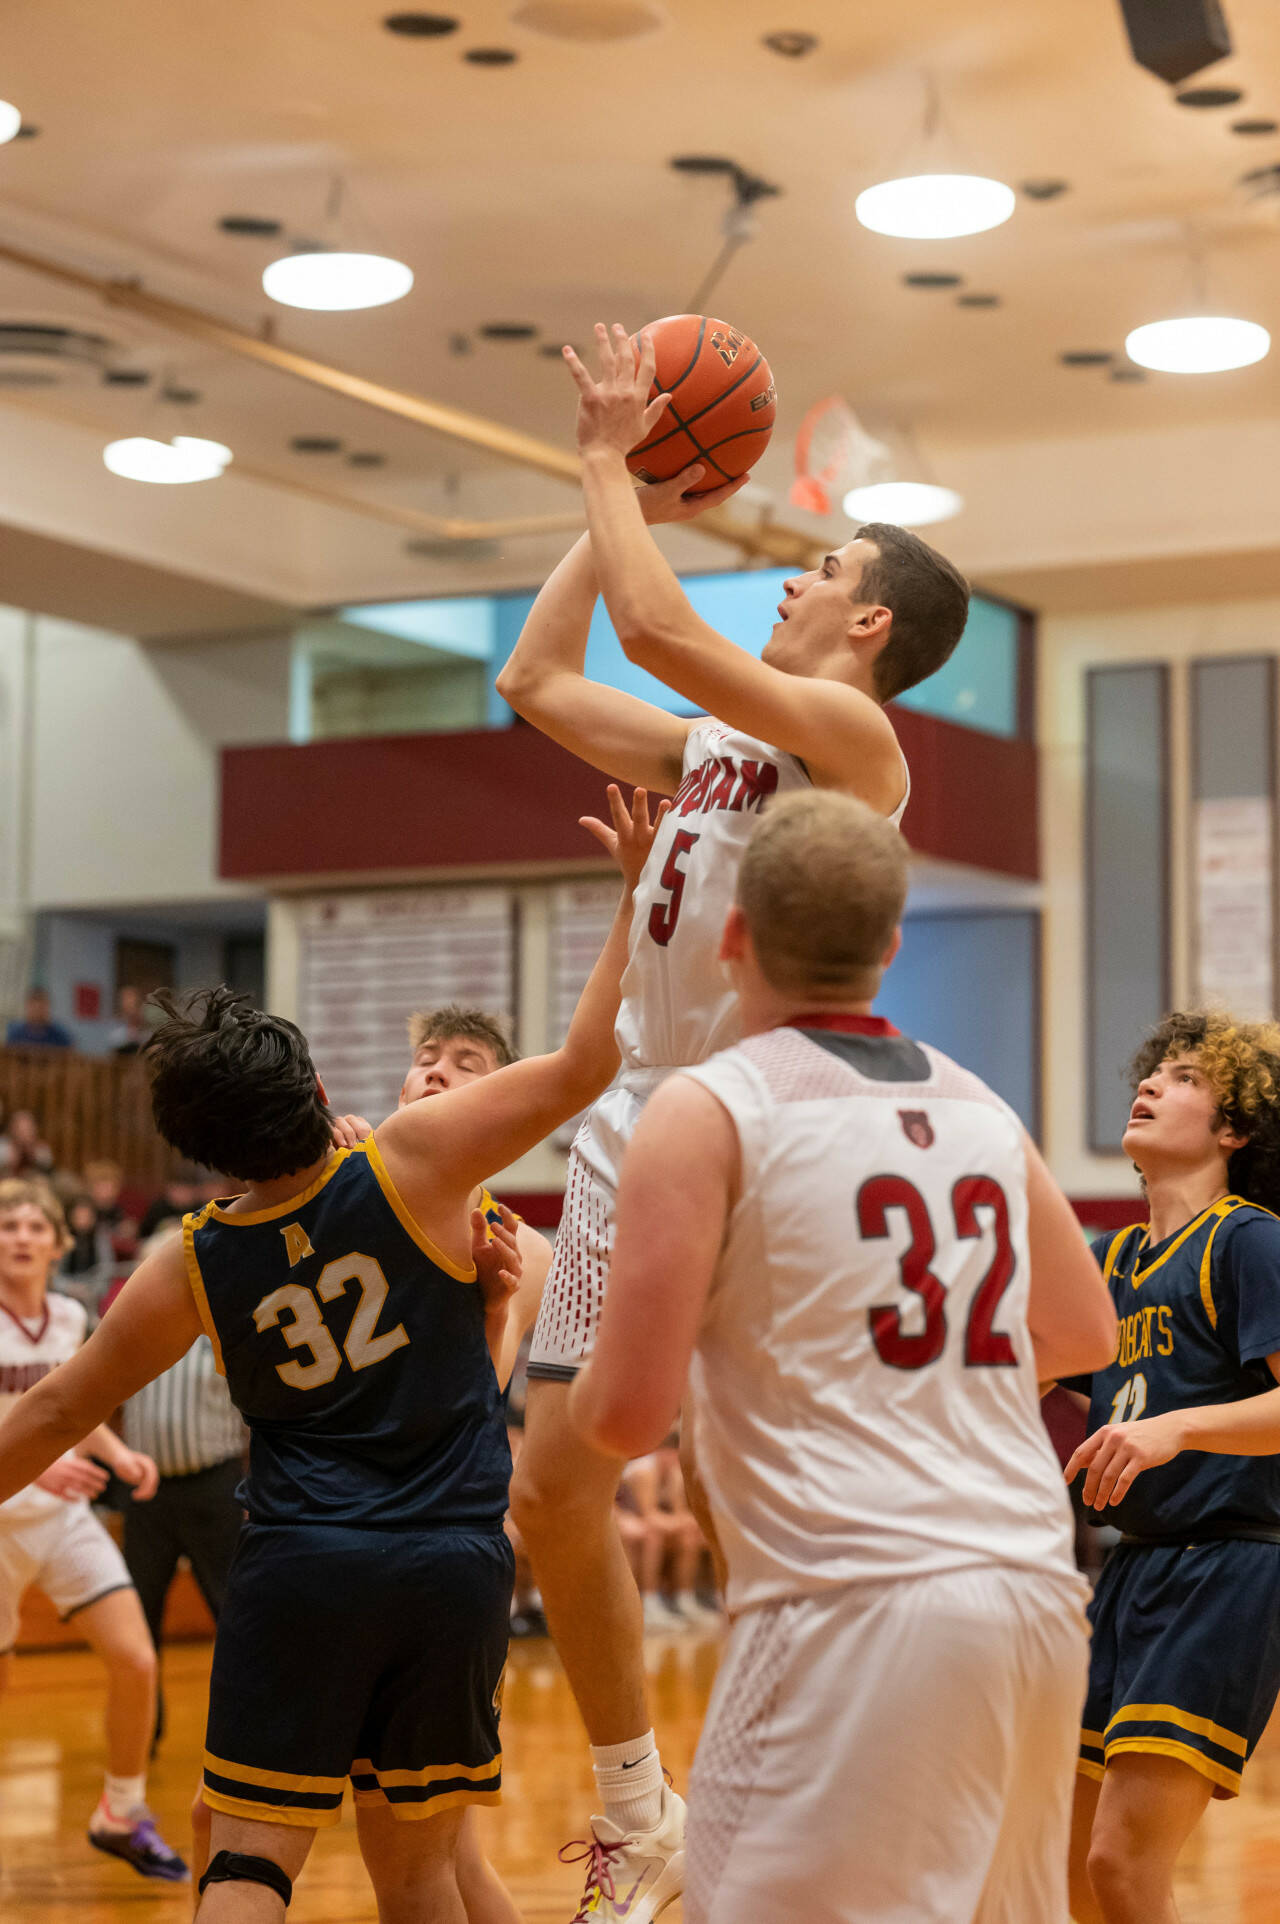 PHOTO BY FOREST WORGUM Hoquiam’s Owen McNeill (5) puts up a jump shot over Aberdeen’s Kenny Dawson, left, during the Grizzlies’ 67-38 win on Friday at Hoquiam High School.